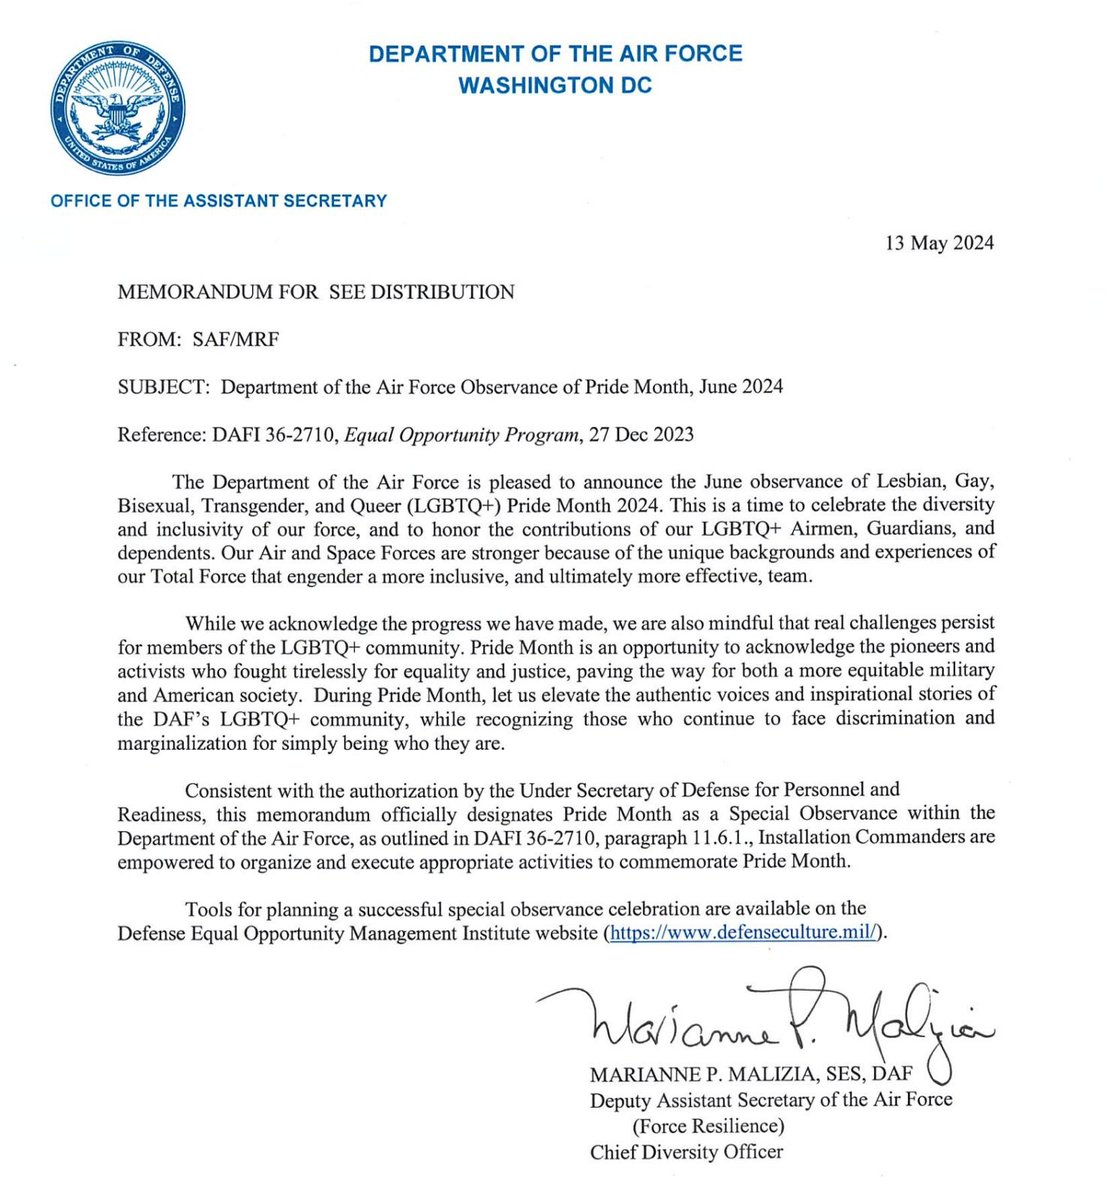 The United States Air Force just sent out this memo about its upcoming Pride Month celebration. They claim LGBTQ inclusion makes the military stronger and ultimately creates a 'more effective team.” The world is laughing at us.